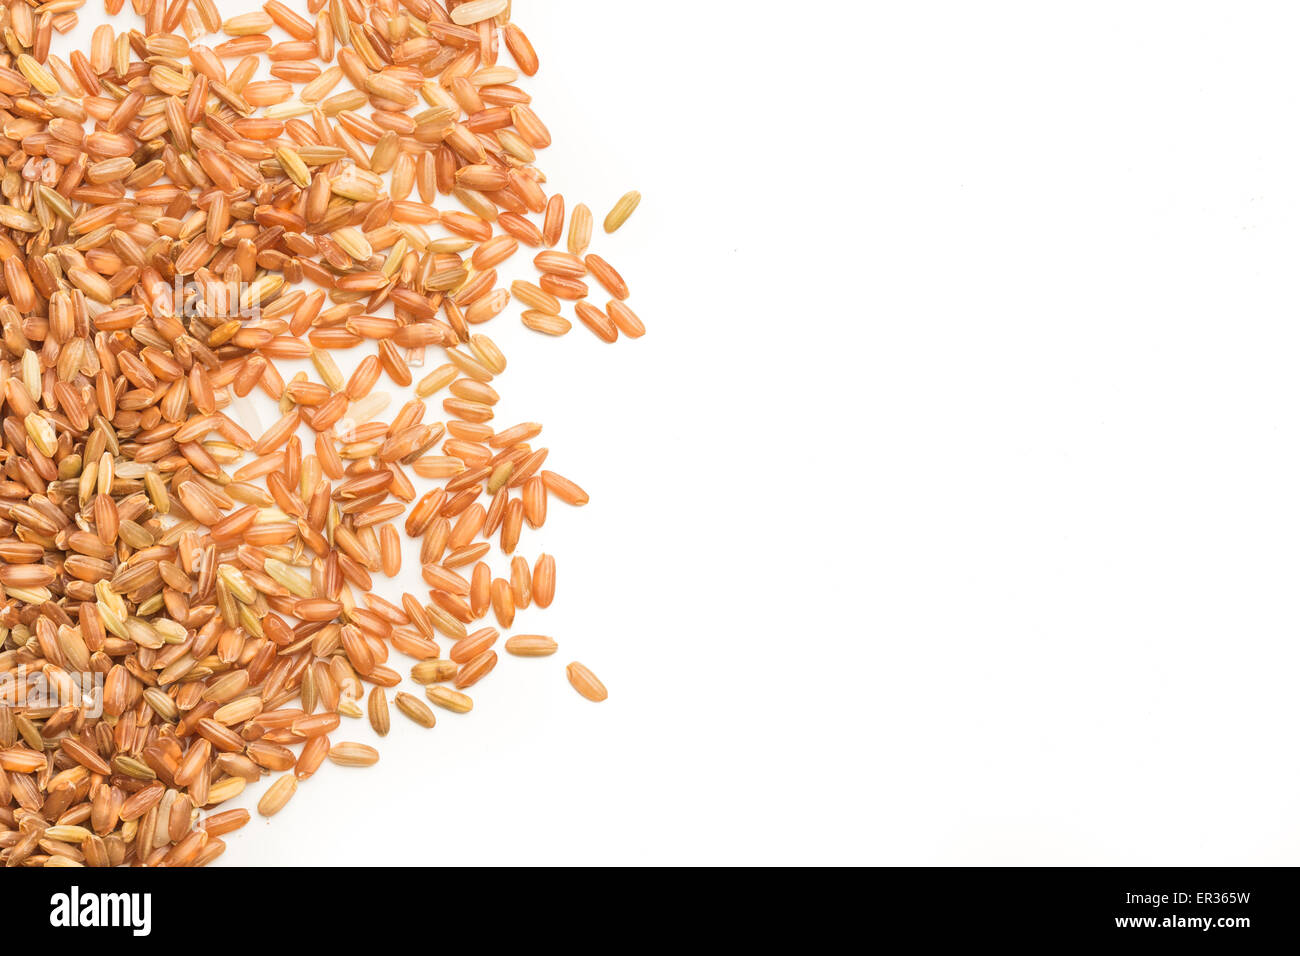 brown rice isolated on white with copy space Stock Photo